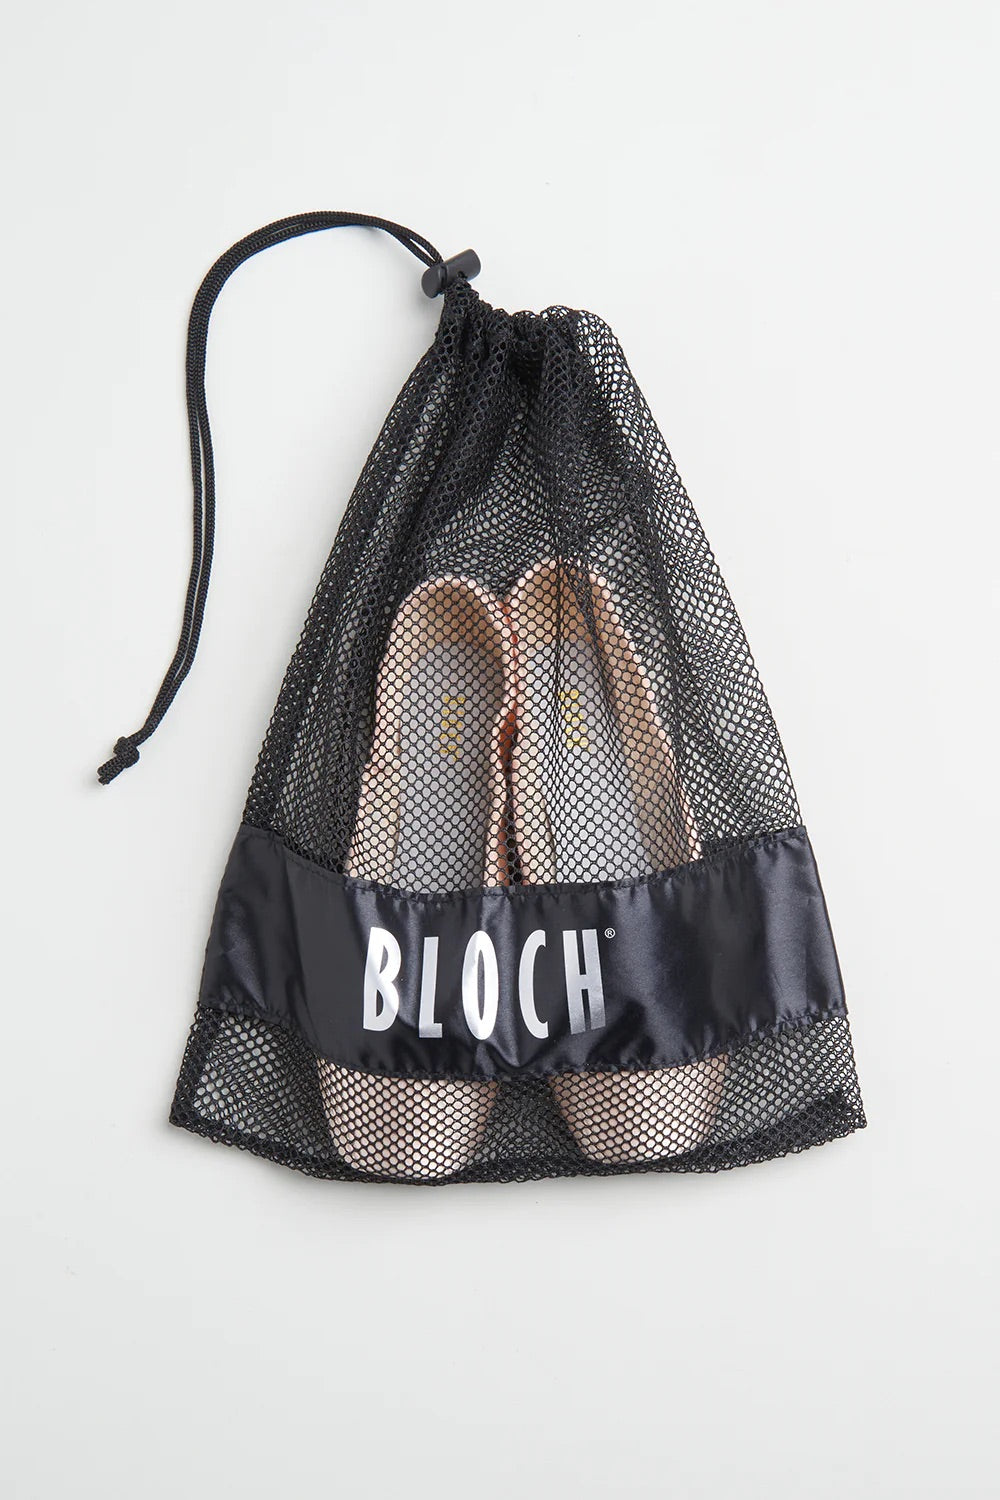 Bloch Pointe Shoe Bag - Large - Black from the Collective Dancewear